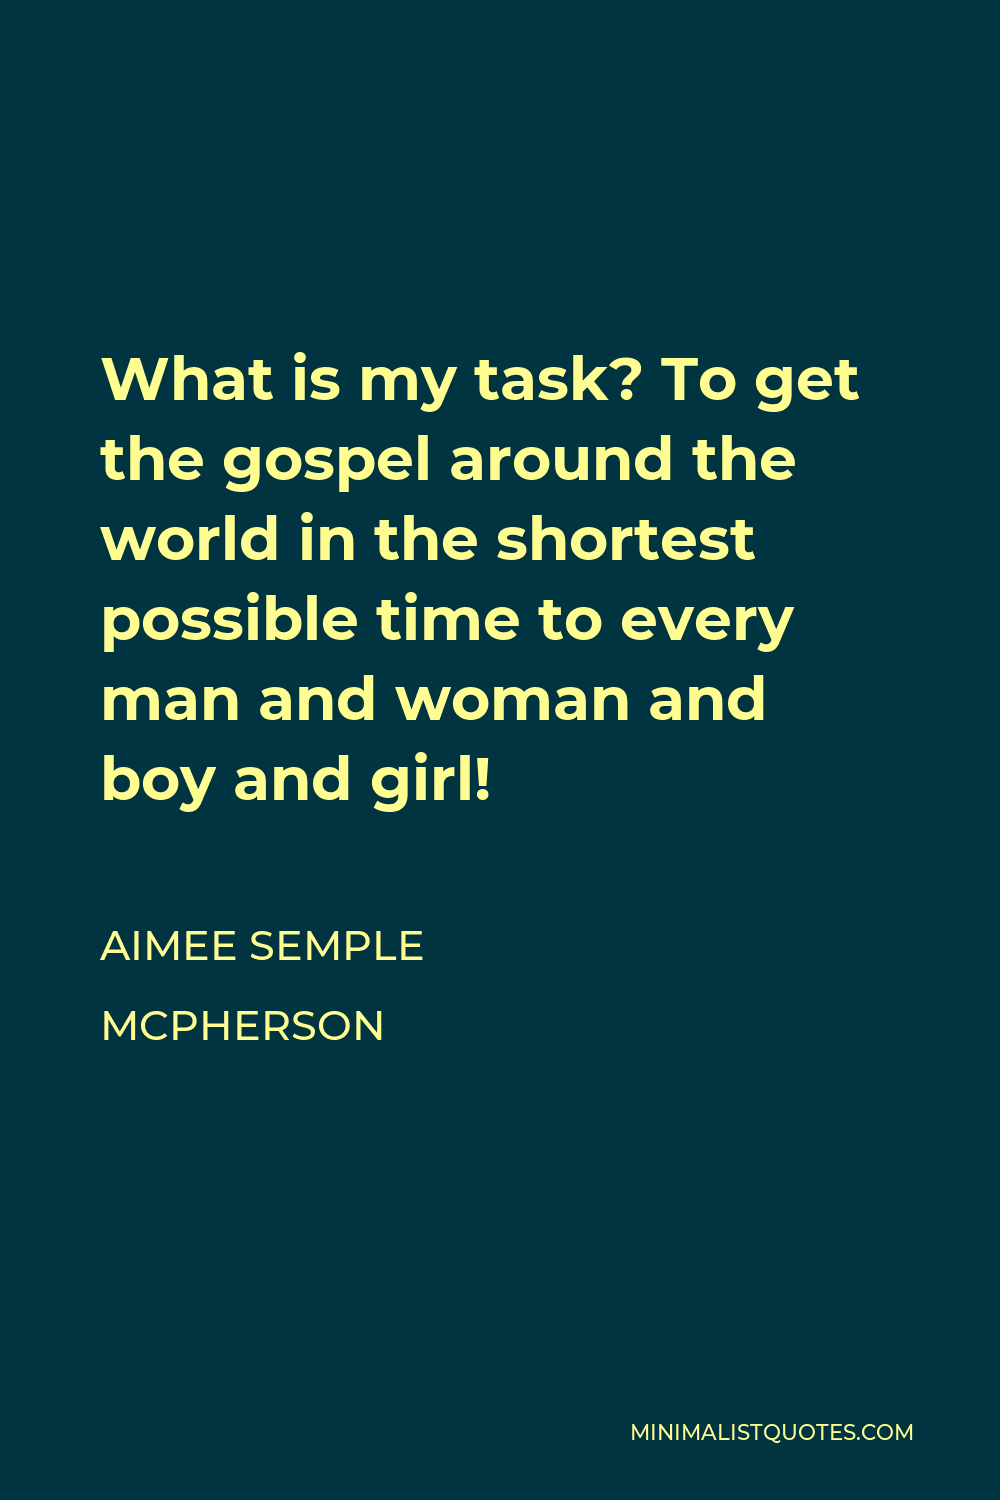 Aimee Semple McPherson Quote - What is my task? To get the gospel around the world in the shortest possible time to every man and woman and boy and girl!